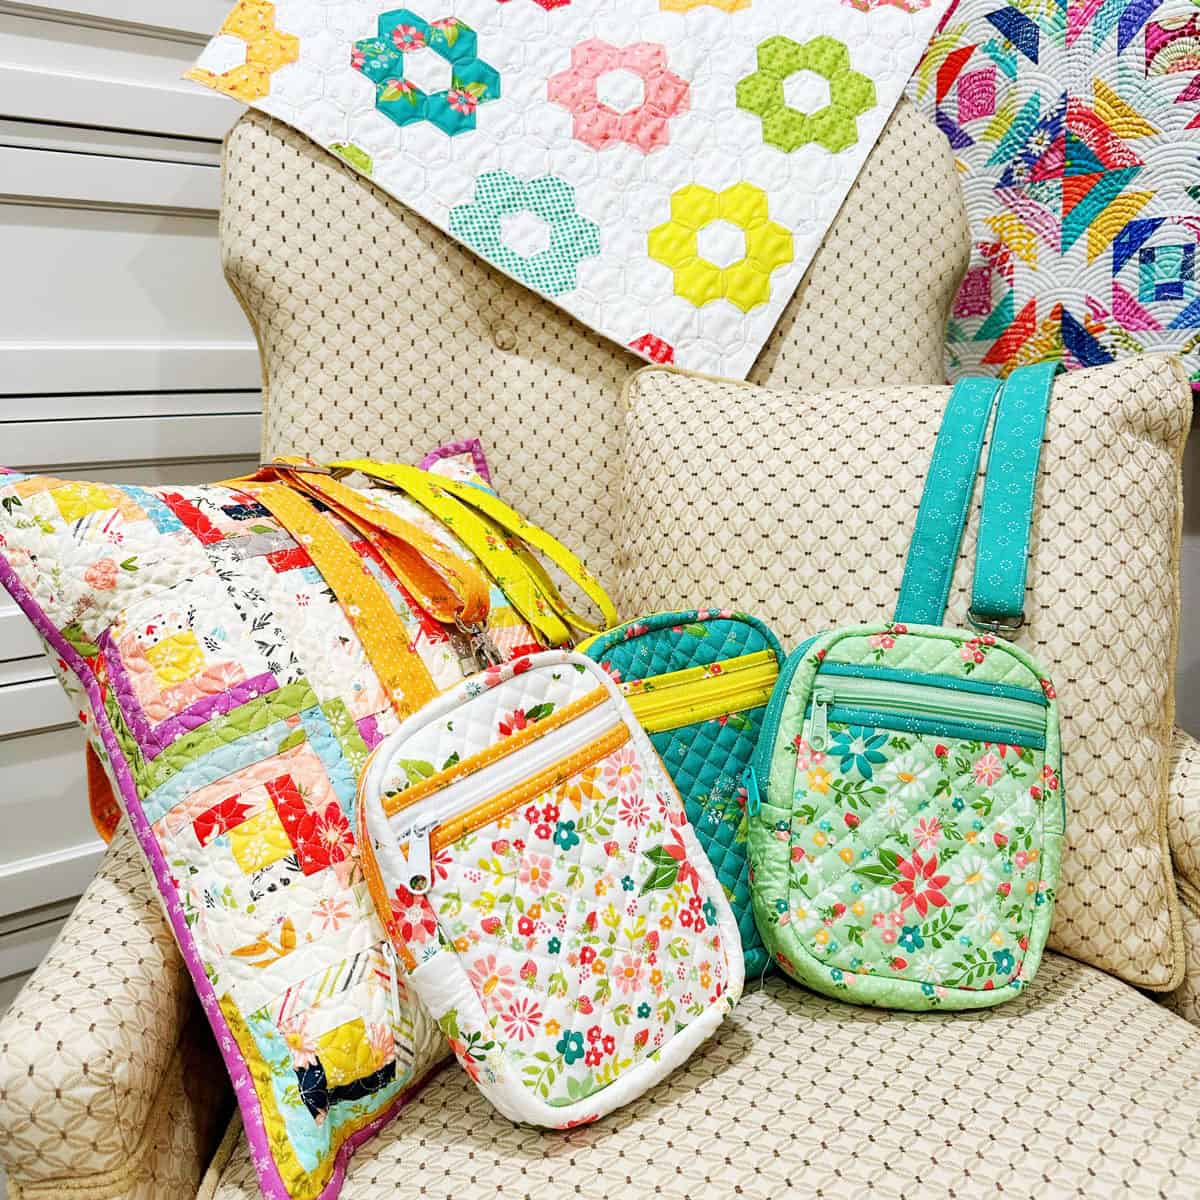 Quilted Crossbody Bags on a chair with patchwork log cabin pillow and pineapple quilt on the wall.